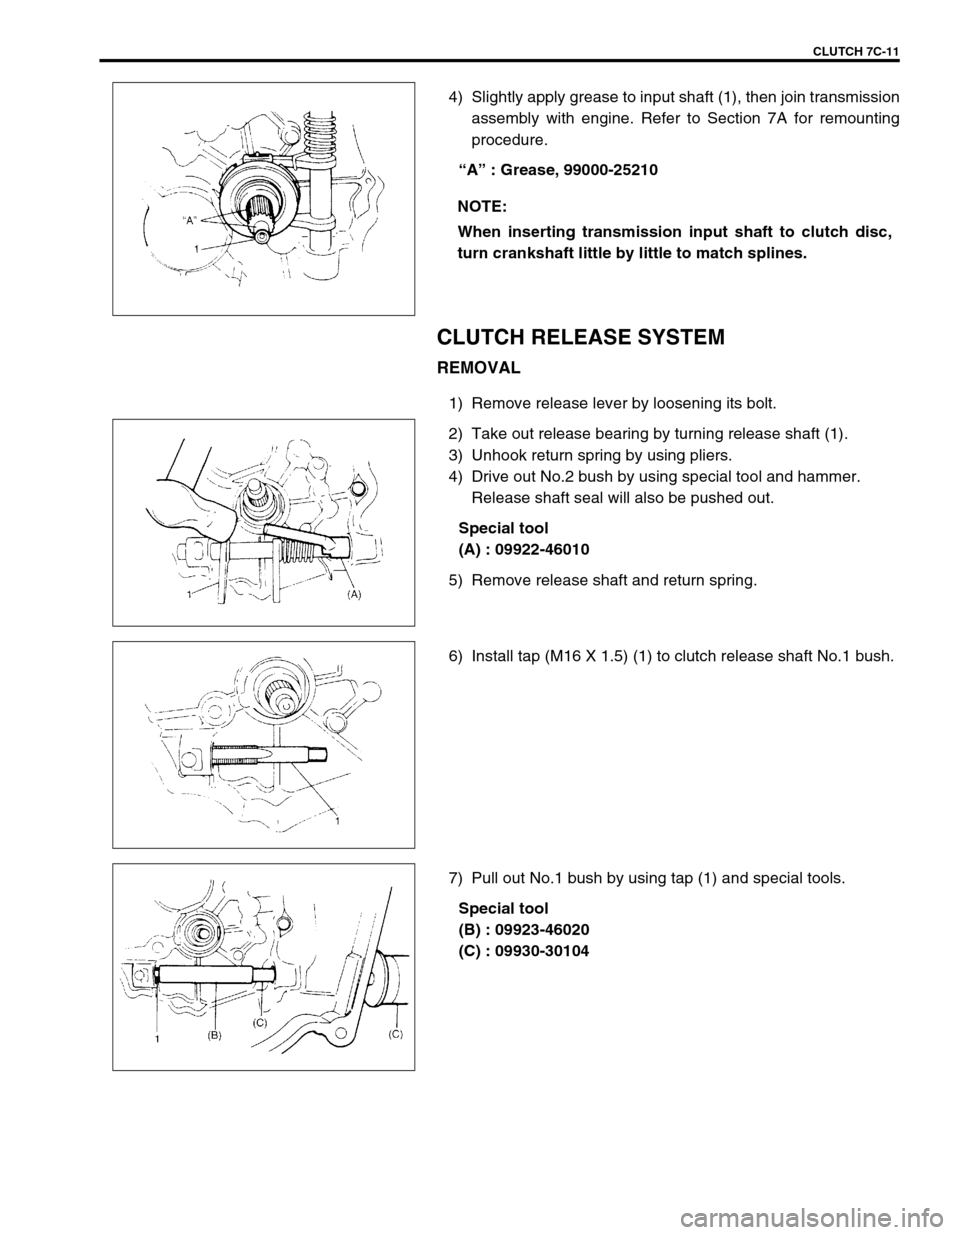 SUZUKI SWIFT 2000 1.G Transmission Service Workshop Manual CLUTCH 7C-11
4) Slightly apply grease to input shaft (1), then join transmission
assembly with engine. Refer to Section 7A for remounting
procedure.
“A” : Grease, 99000-25210
CLUTCH RELEASE SYSTEM